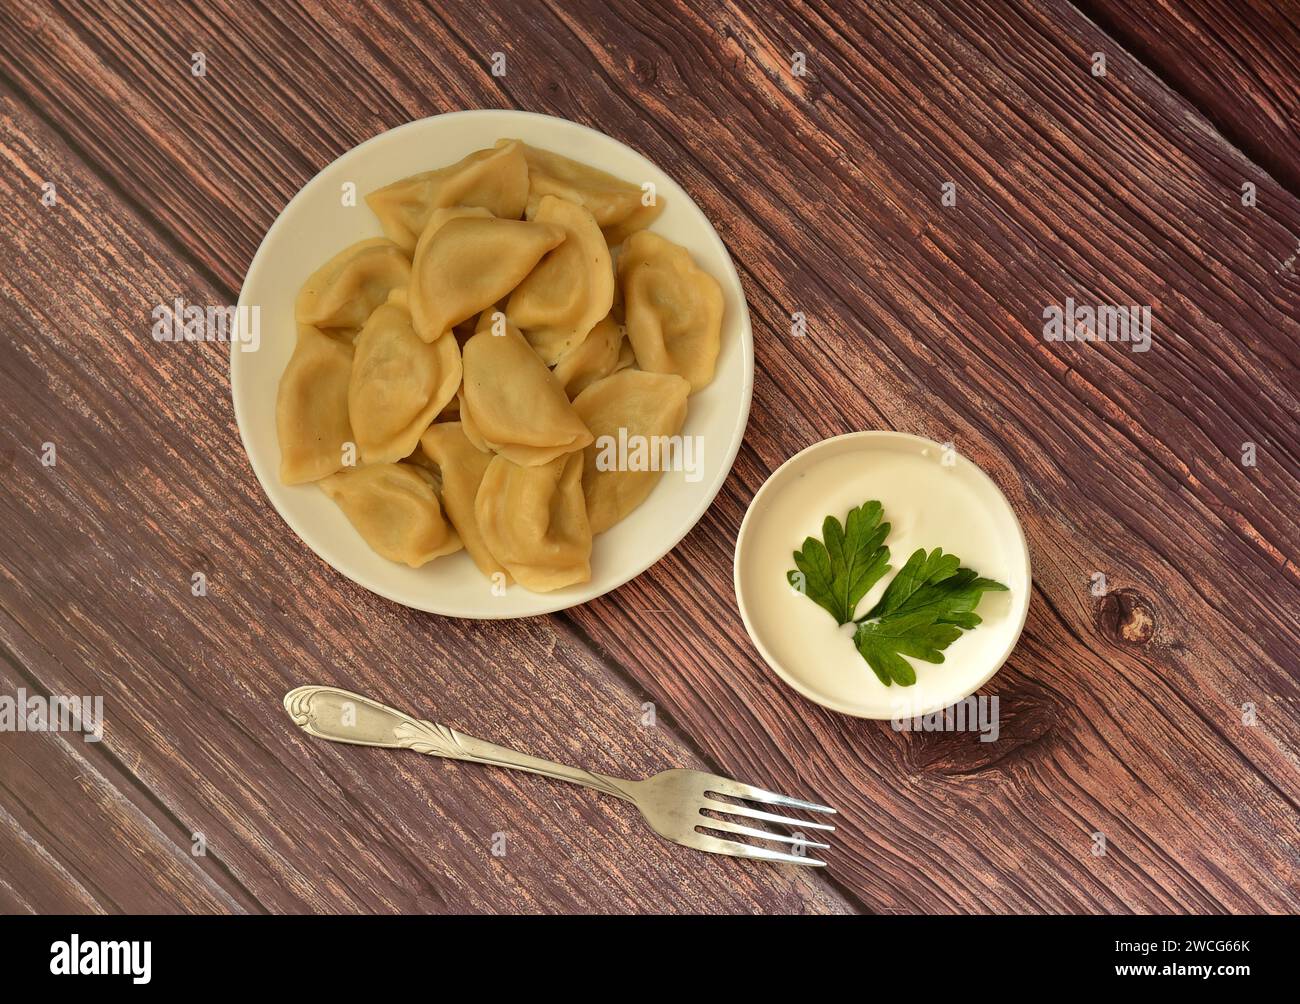 A plate of freshly cooked dumplings on a wooden table, next to a fork and a cup of sour cream with herbs. Close-up. Stock Photo